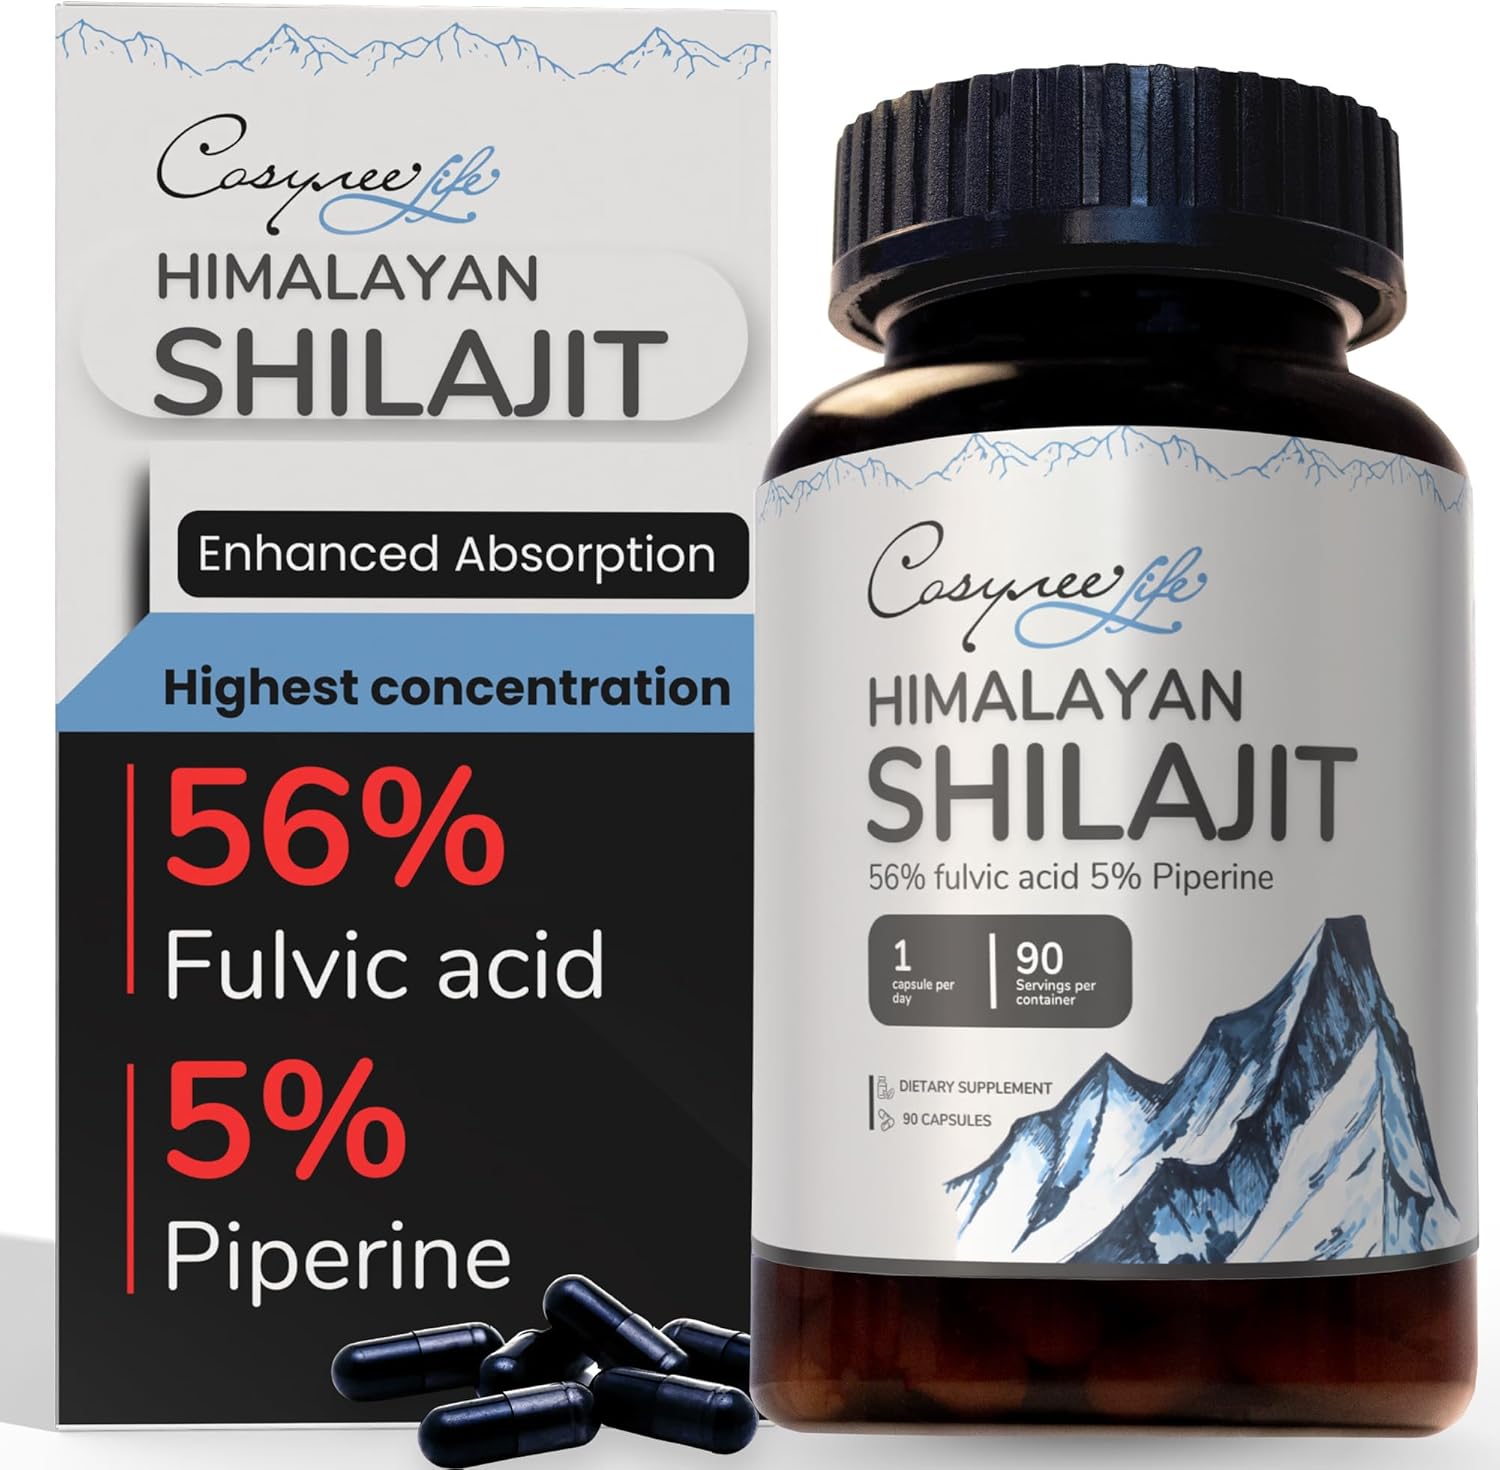 shilajit pure himalayan natural organic 90 count 5 piperine 56 fulvic acid for maximum potency 85 trace minerals metabol